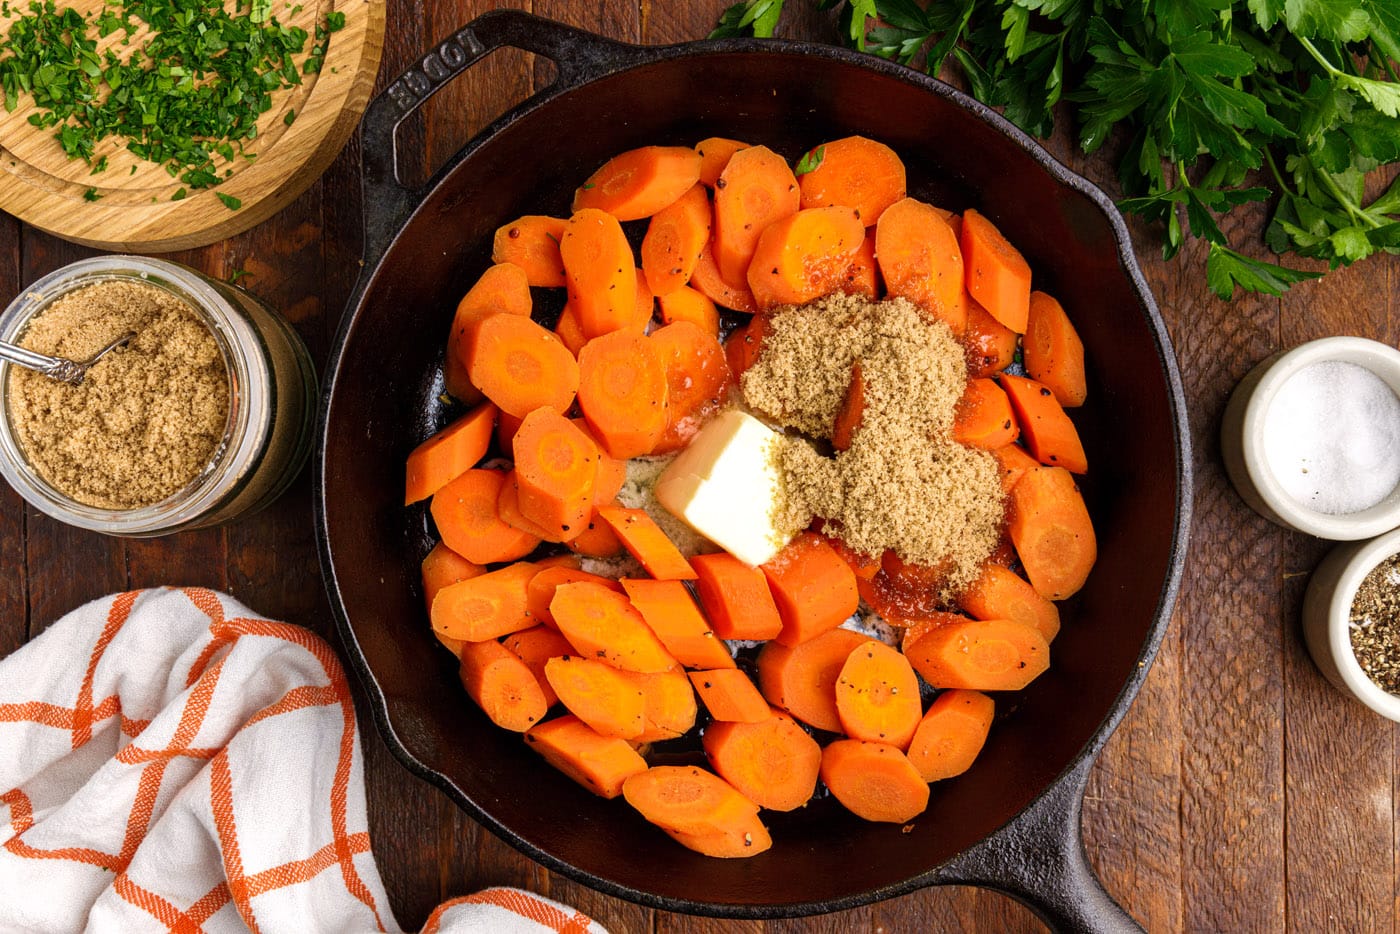 brown sugar and butter in a skillet with carrots